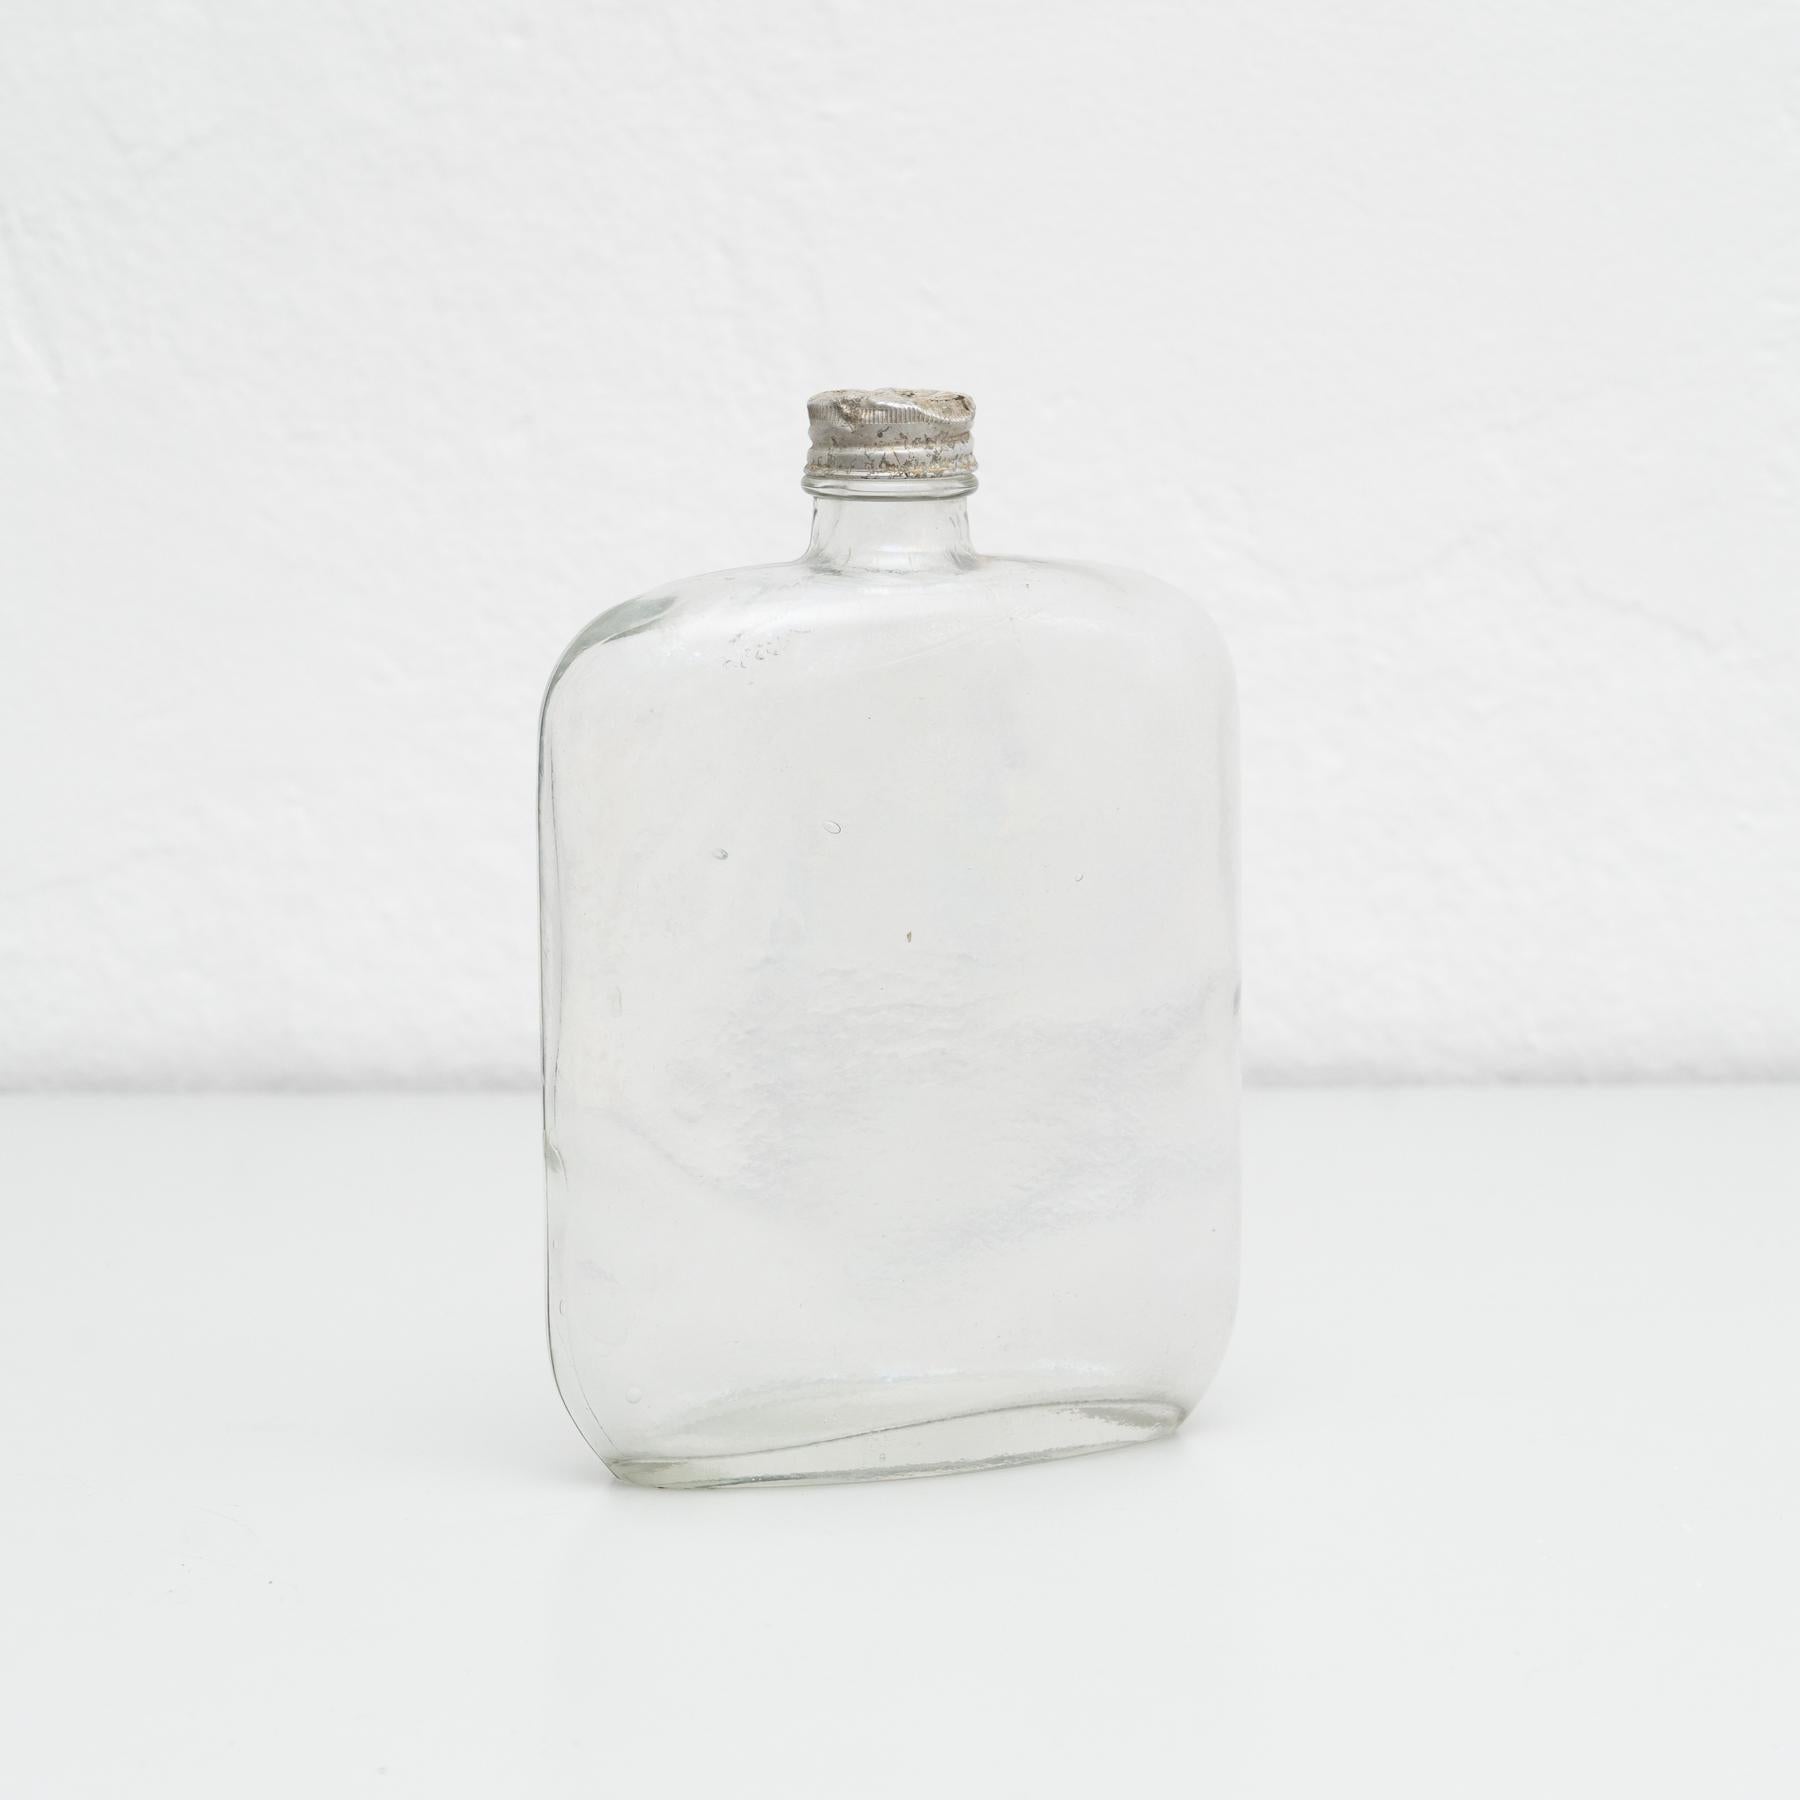 Mid-19th century glass bottle with metal cap.

By unknown manufacturer from France.

In original condition, with minor wear consistent with age and use, preserving a beautiful patina.

Materials:
Glass

Dimensions:
ø 9.5 cm x H 22.5 cm.